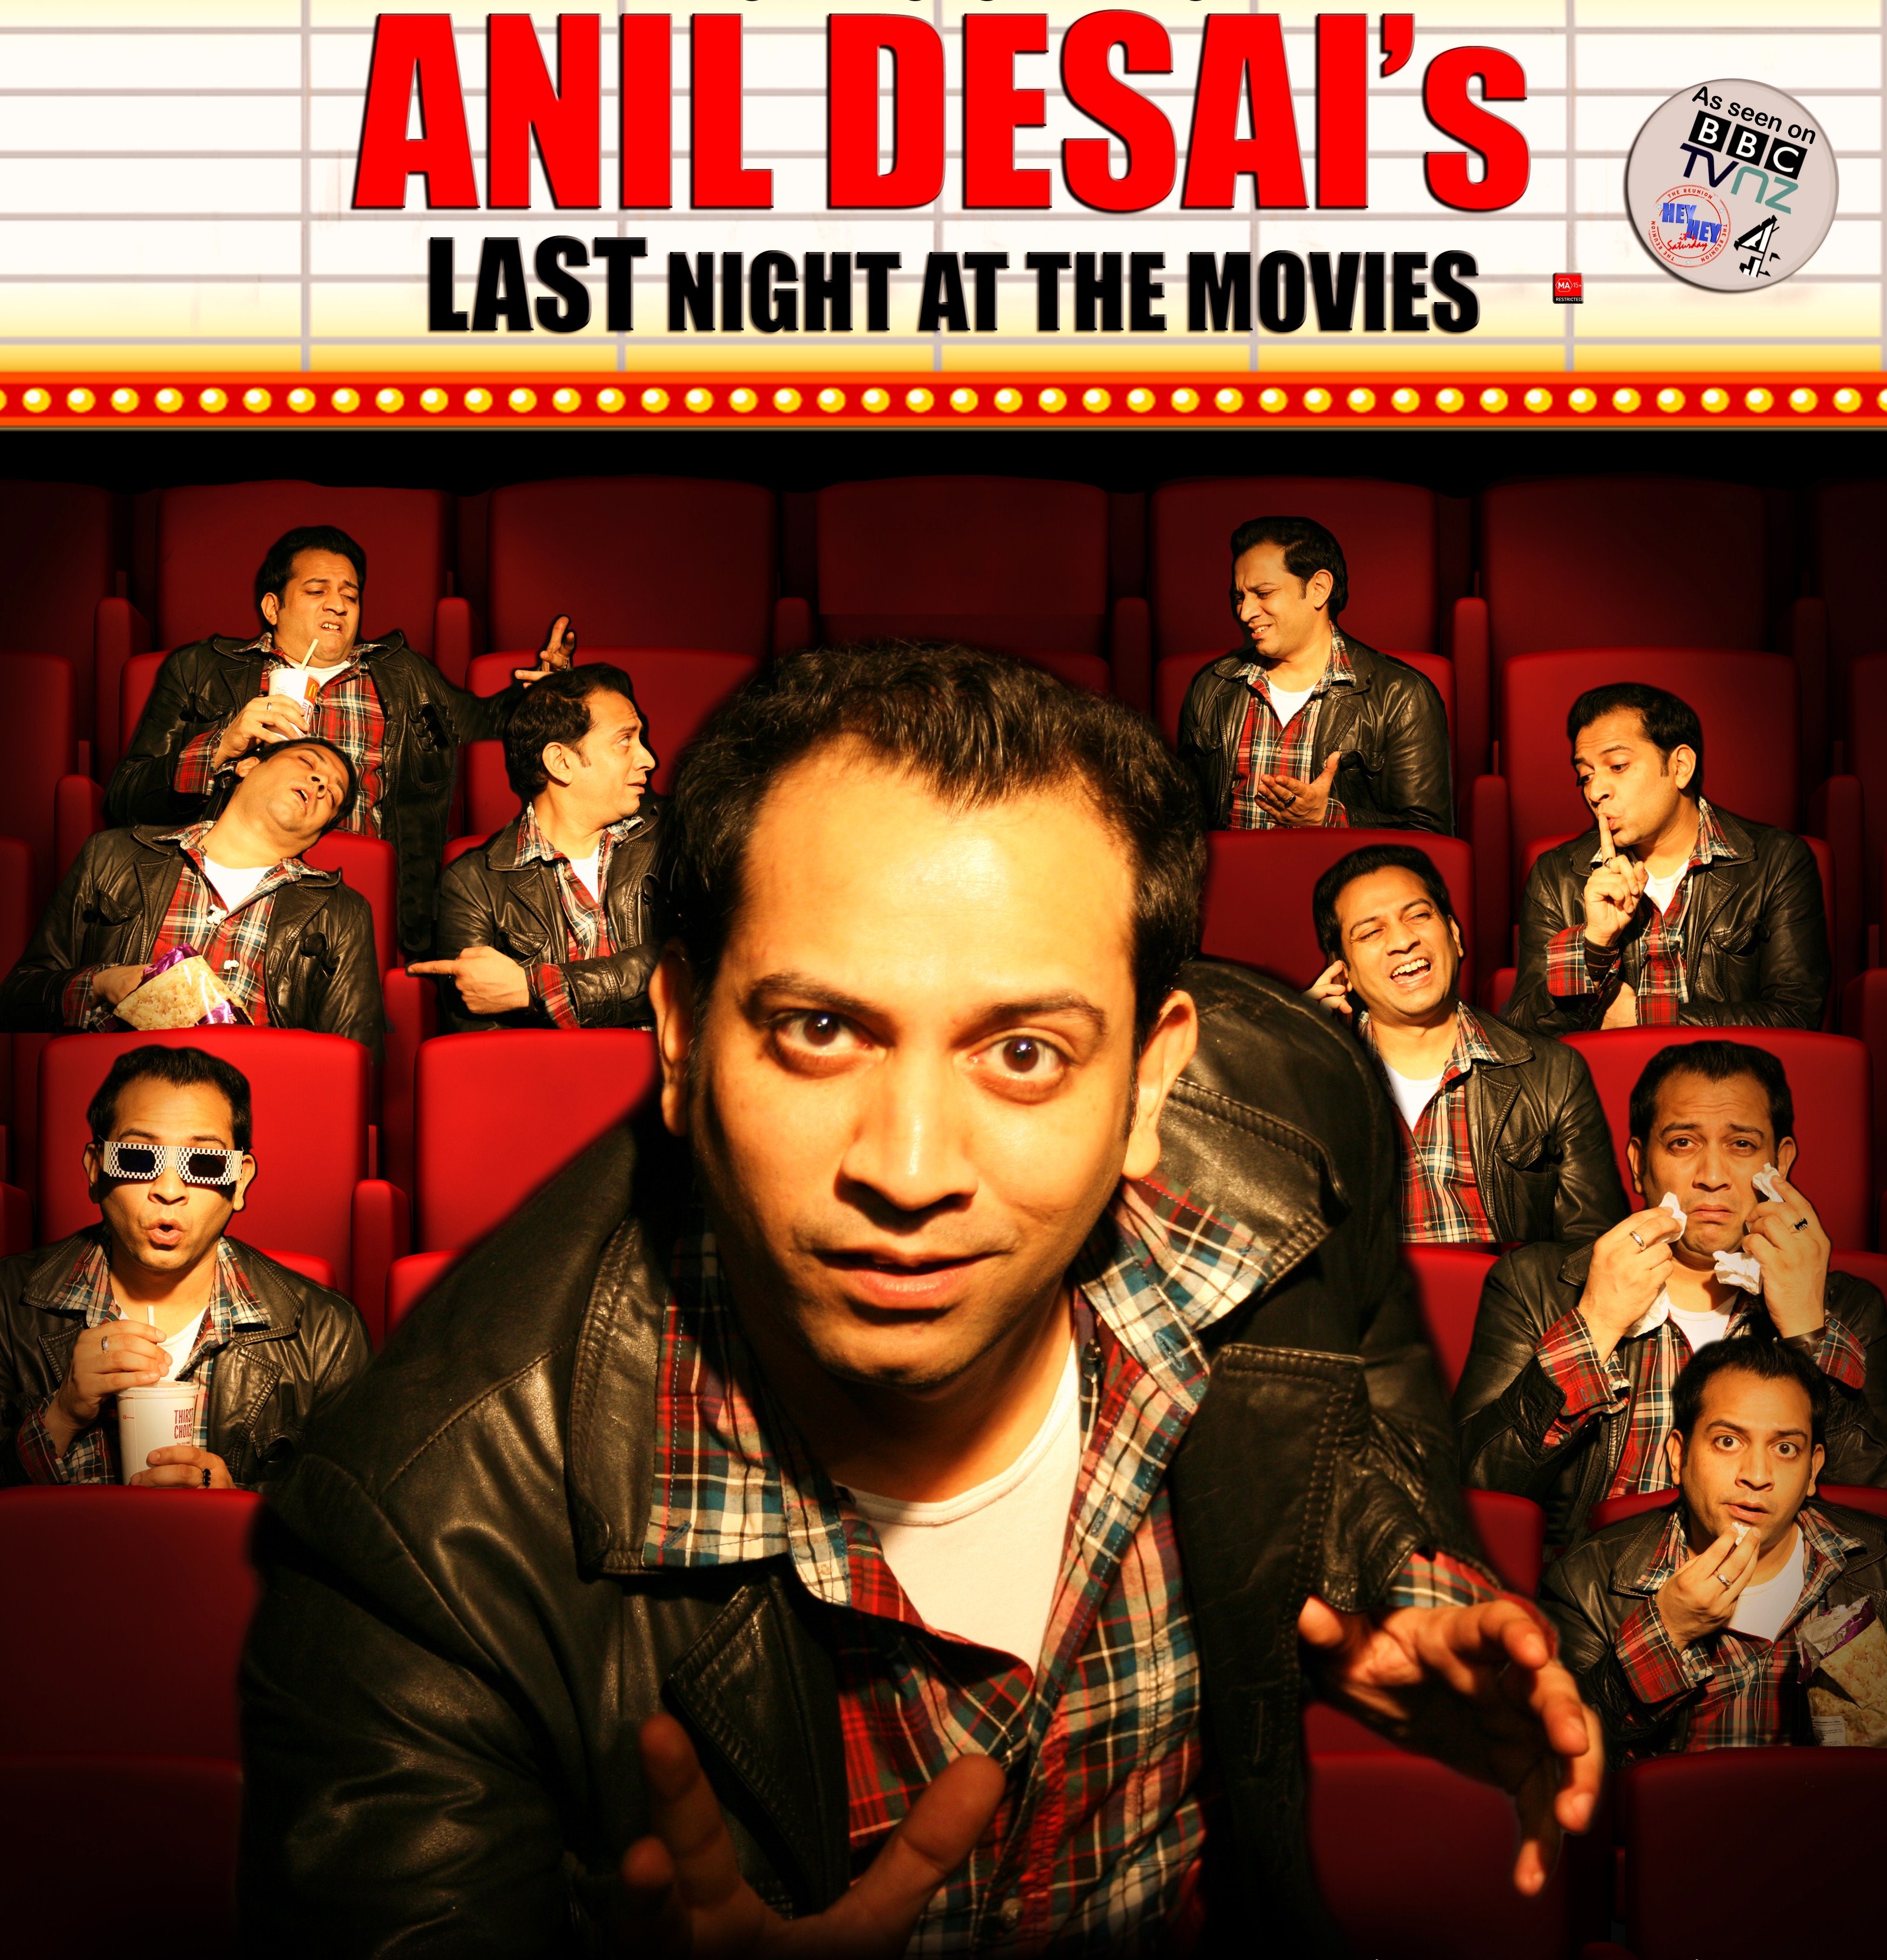 Last Night at the Movies show poster designed by Tomi Foxx & Anil Desai Melbourne International Comedy Festival 2014 Edinburgh Fringe 2014